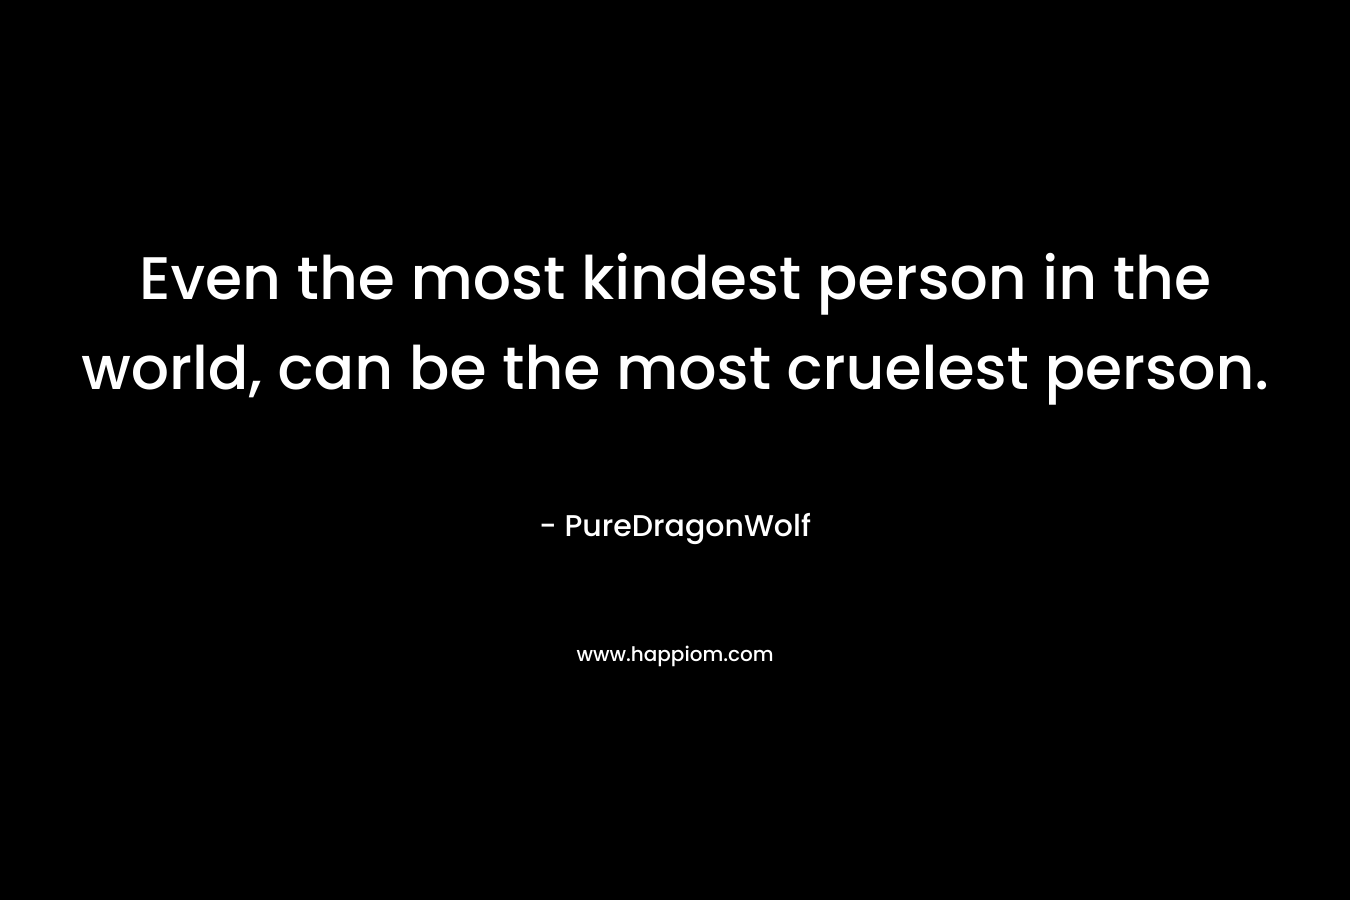 Even the most kindest person in the world, can be the most cruelest person. – PureDragonWolf